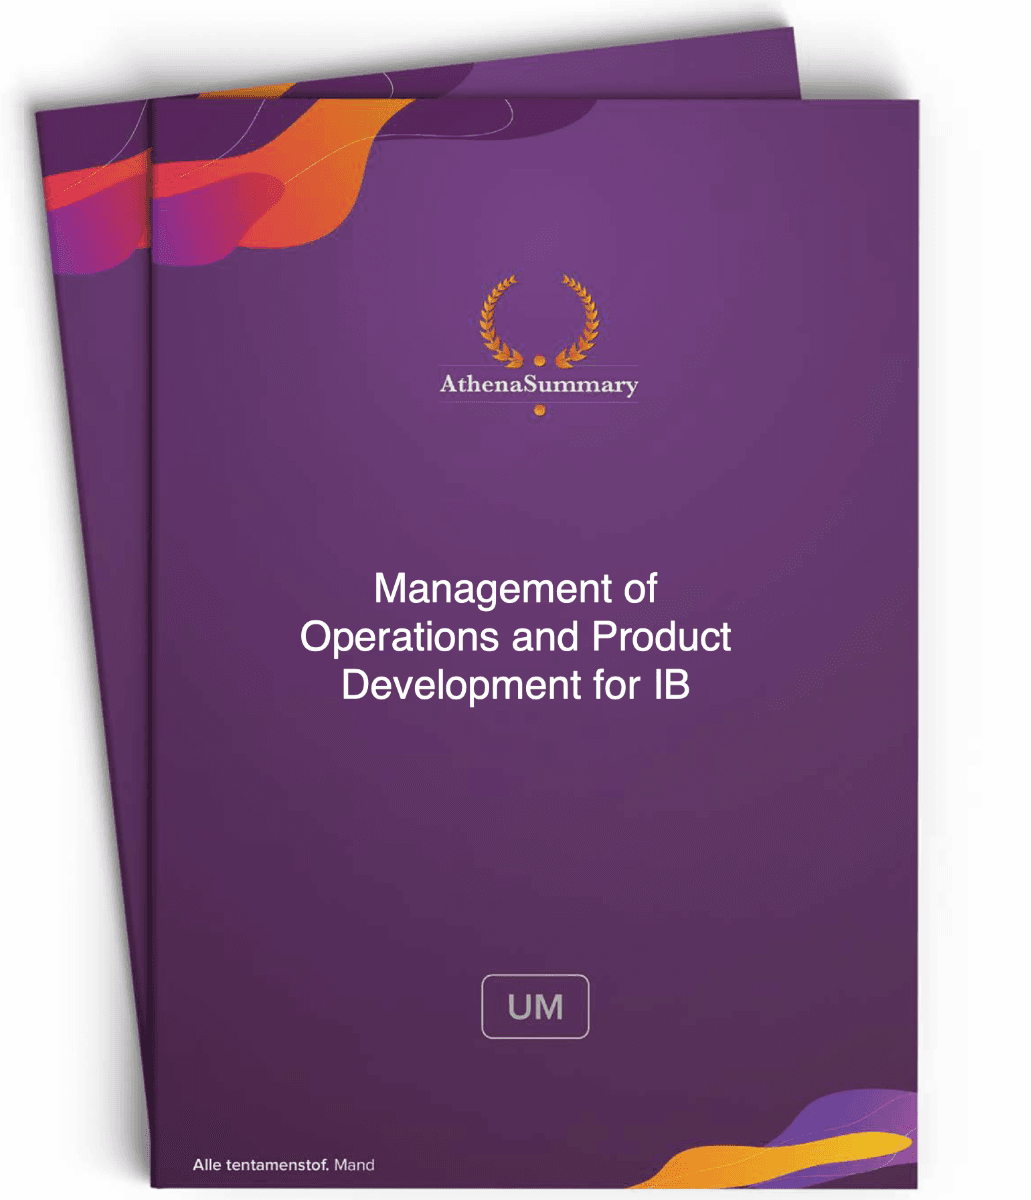 Management of Operations and Product Development for IB